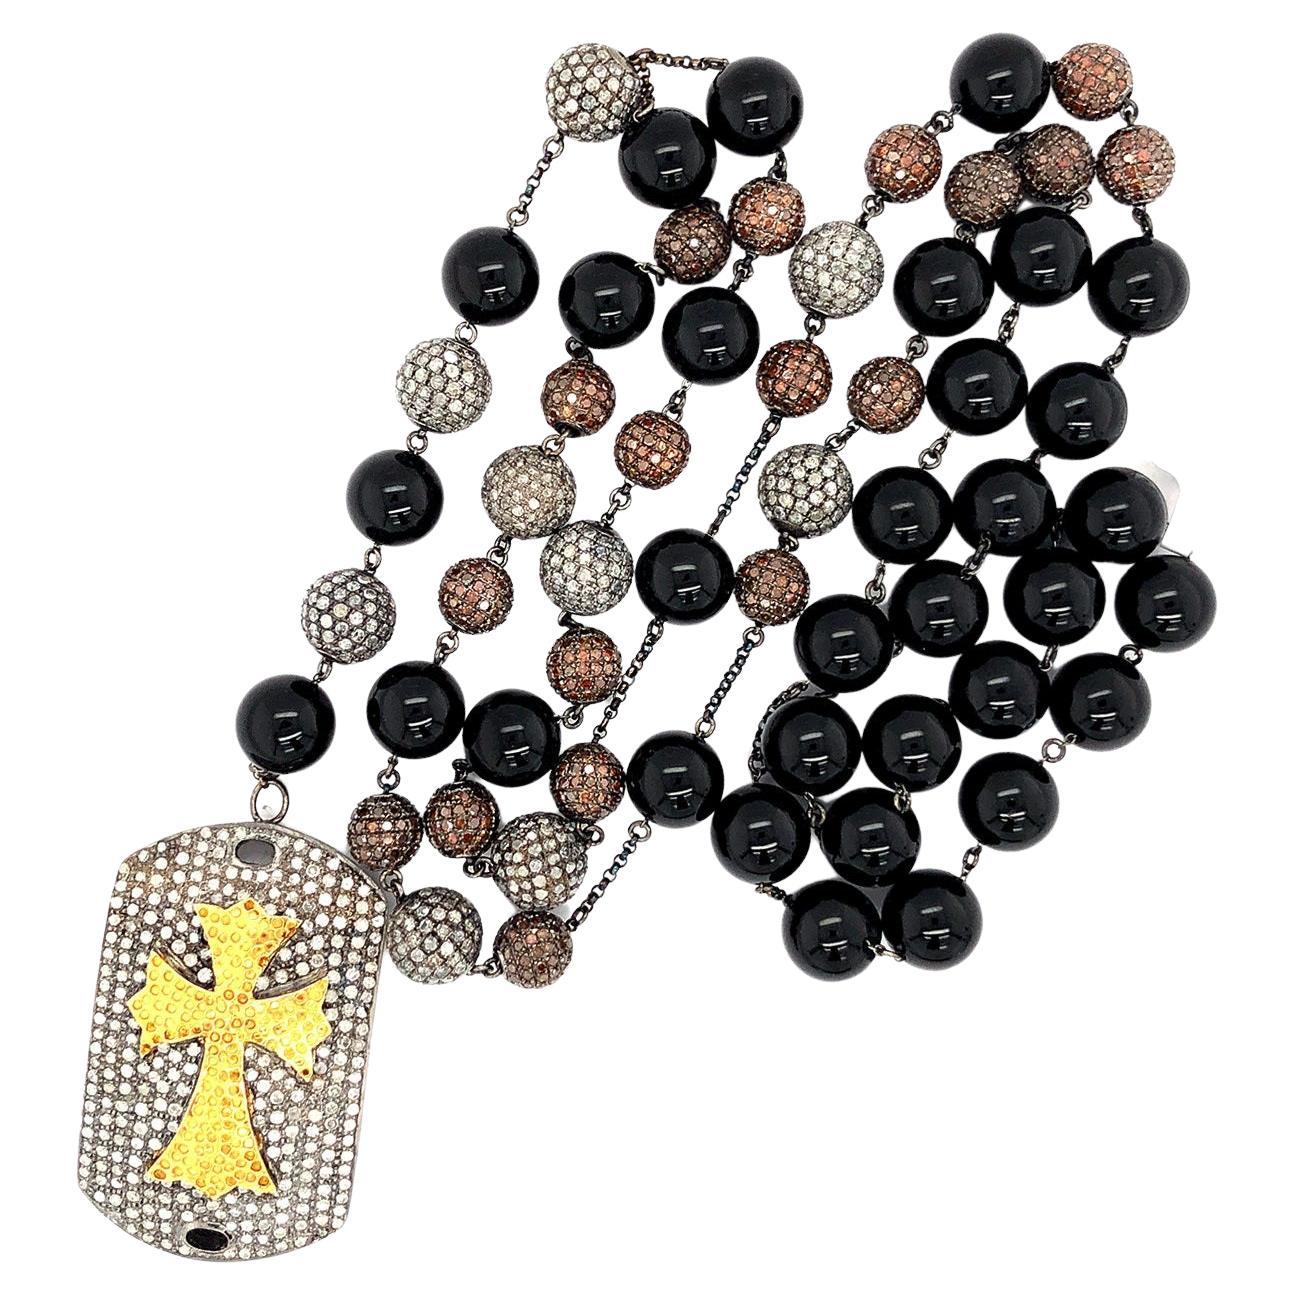 Diamond Beads Onyx Necklace with Cross Design Pendant Made in Gold & Silver